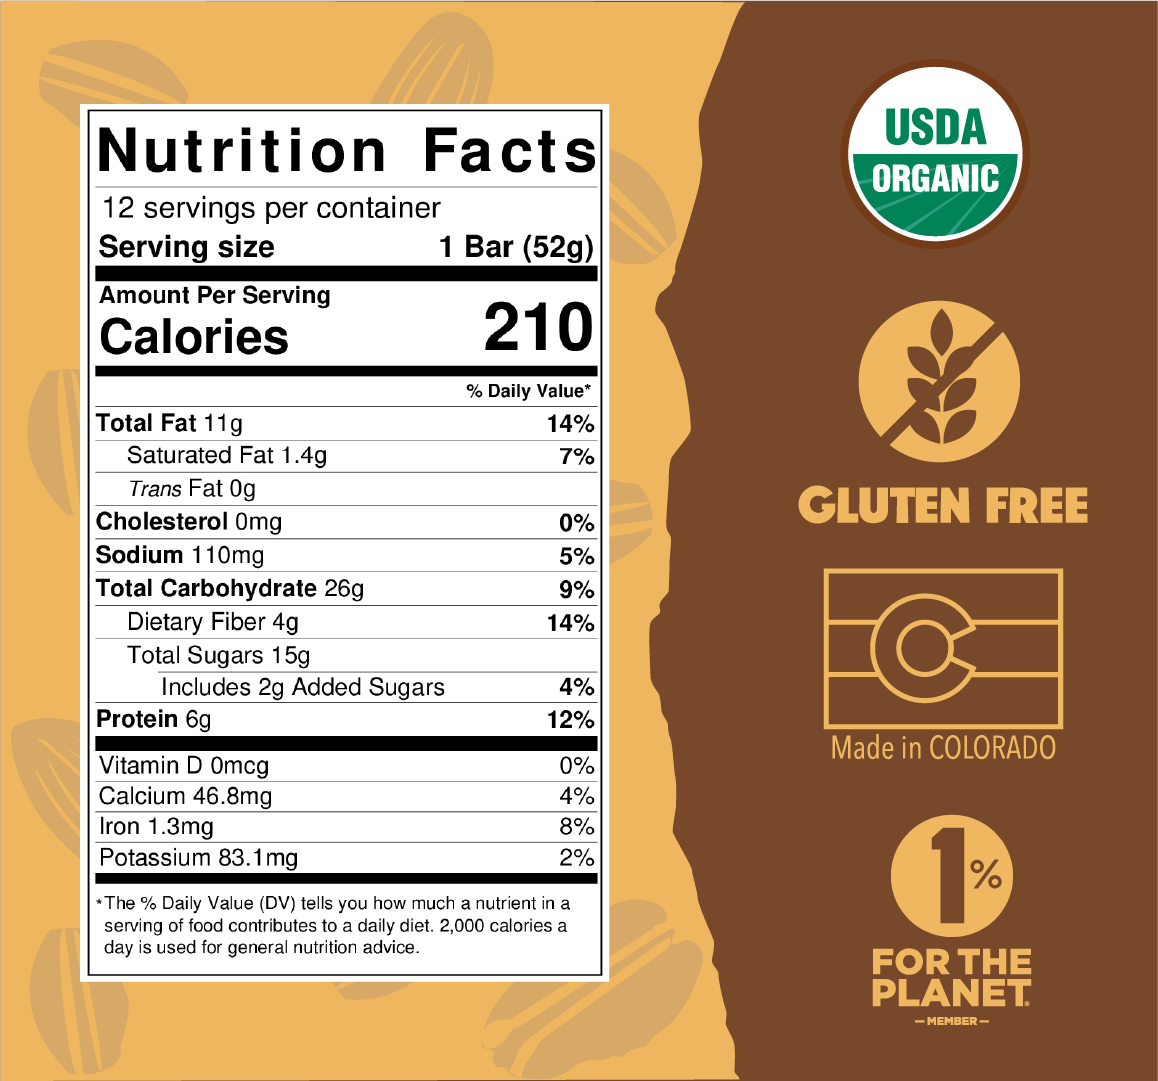 Coffee pecan nutrition facts with organic certification